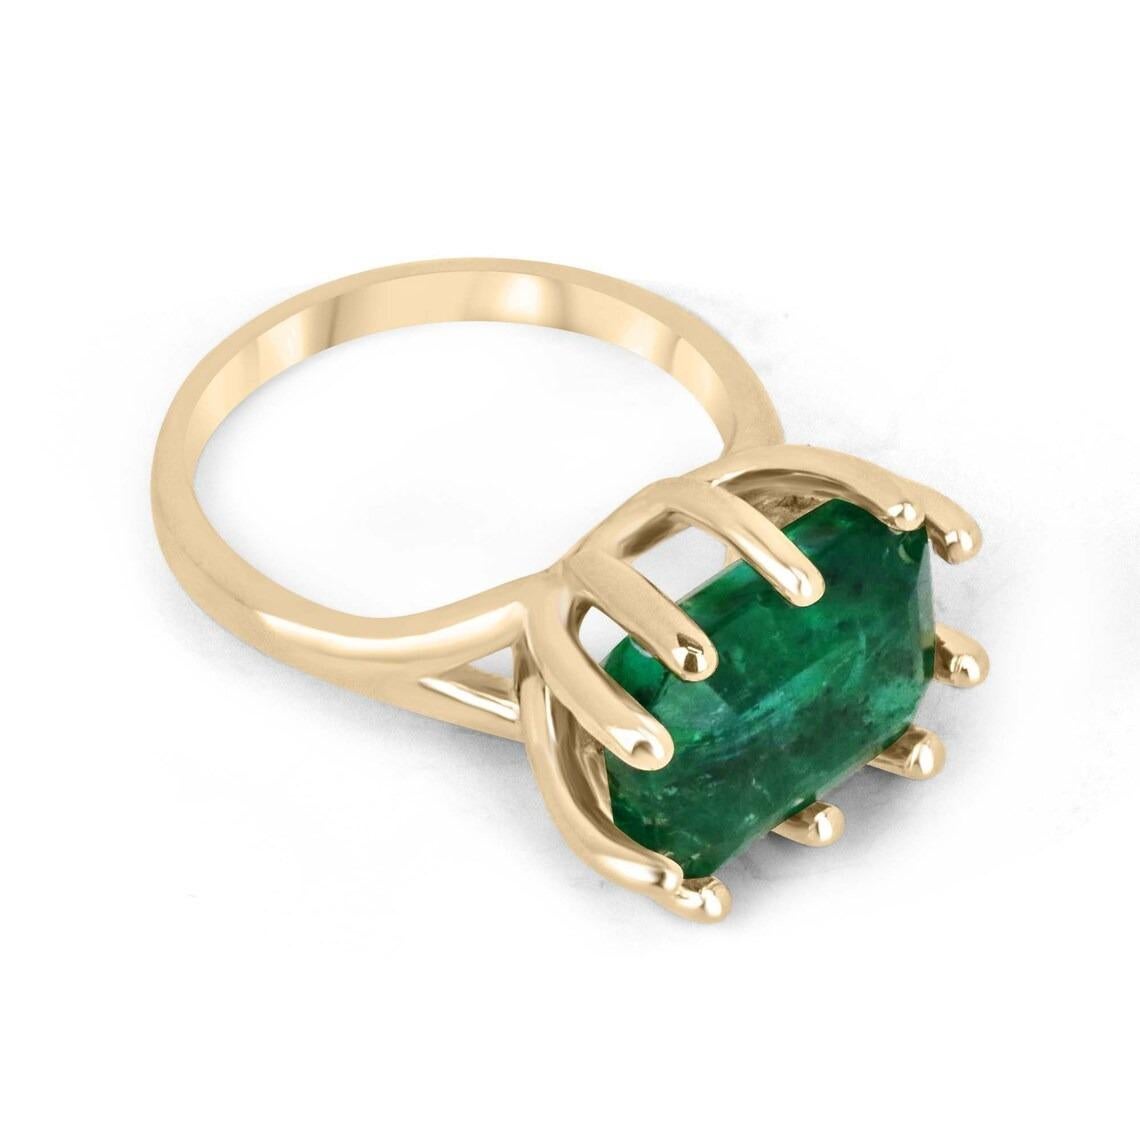 This solitaire ring boasts a breathtaking centerpiece in the form of a 6.12-carat emerald cut emerald. The emerald features a deep, rich green color that is truly stunning and displays outstanding characteristics. The emerald is set horizontally,